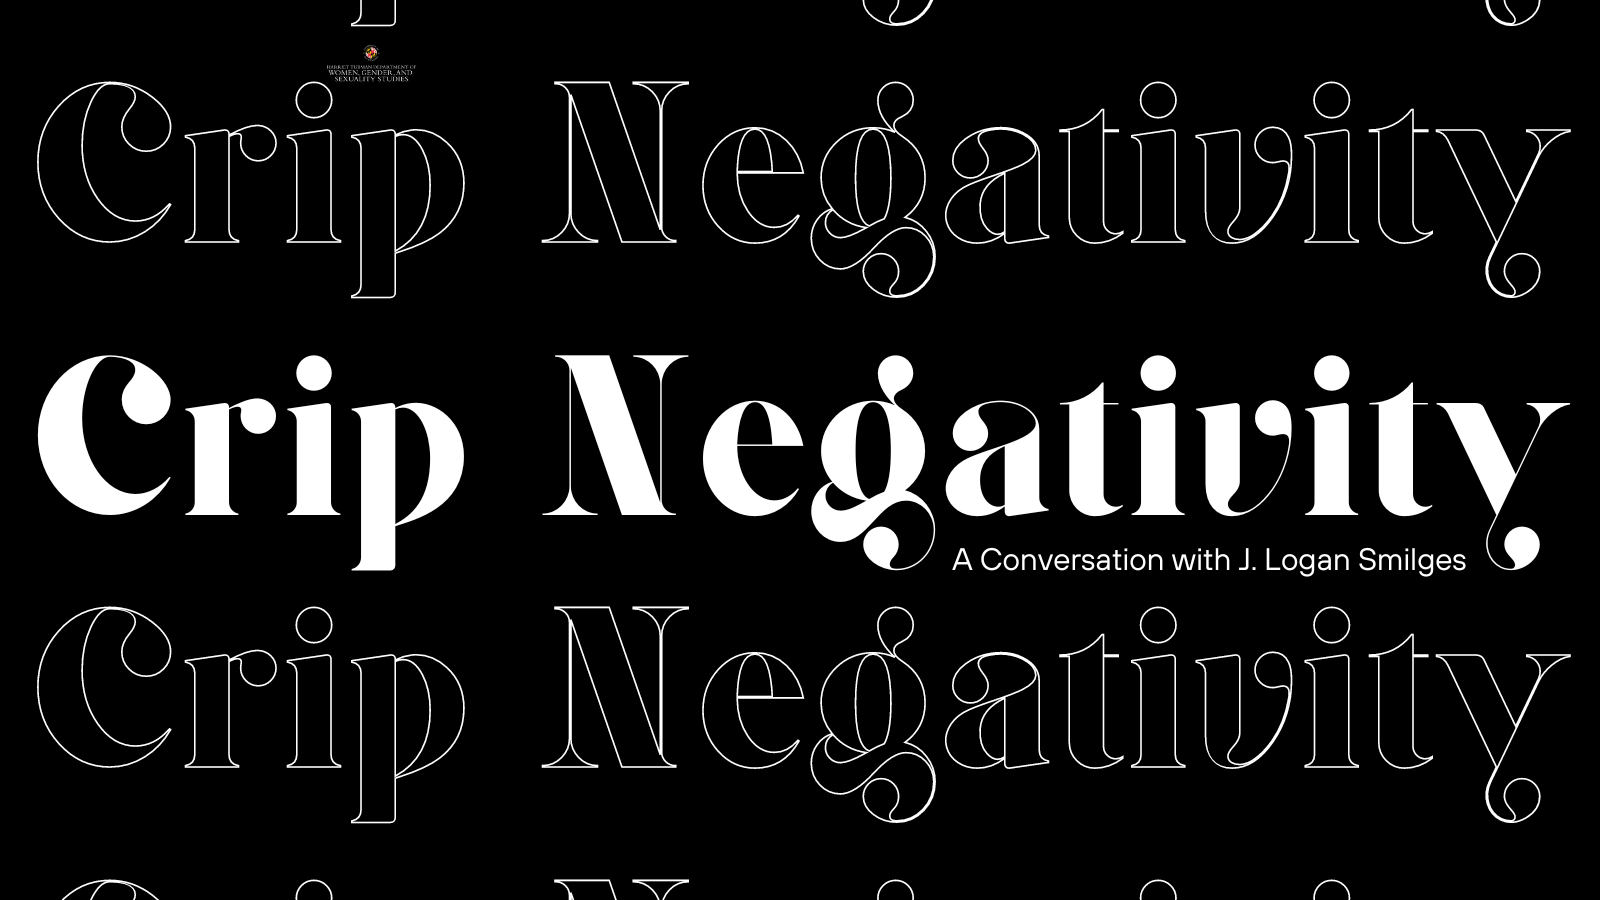 Repeating text of the title Crip Negativity: A Conversation with J. Logan Smilges